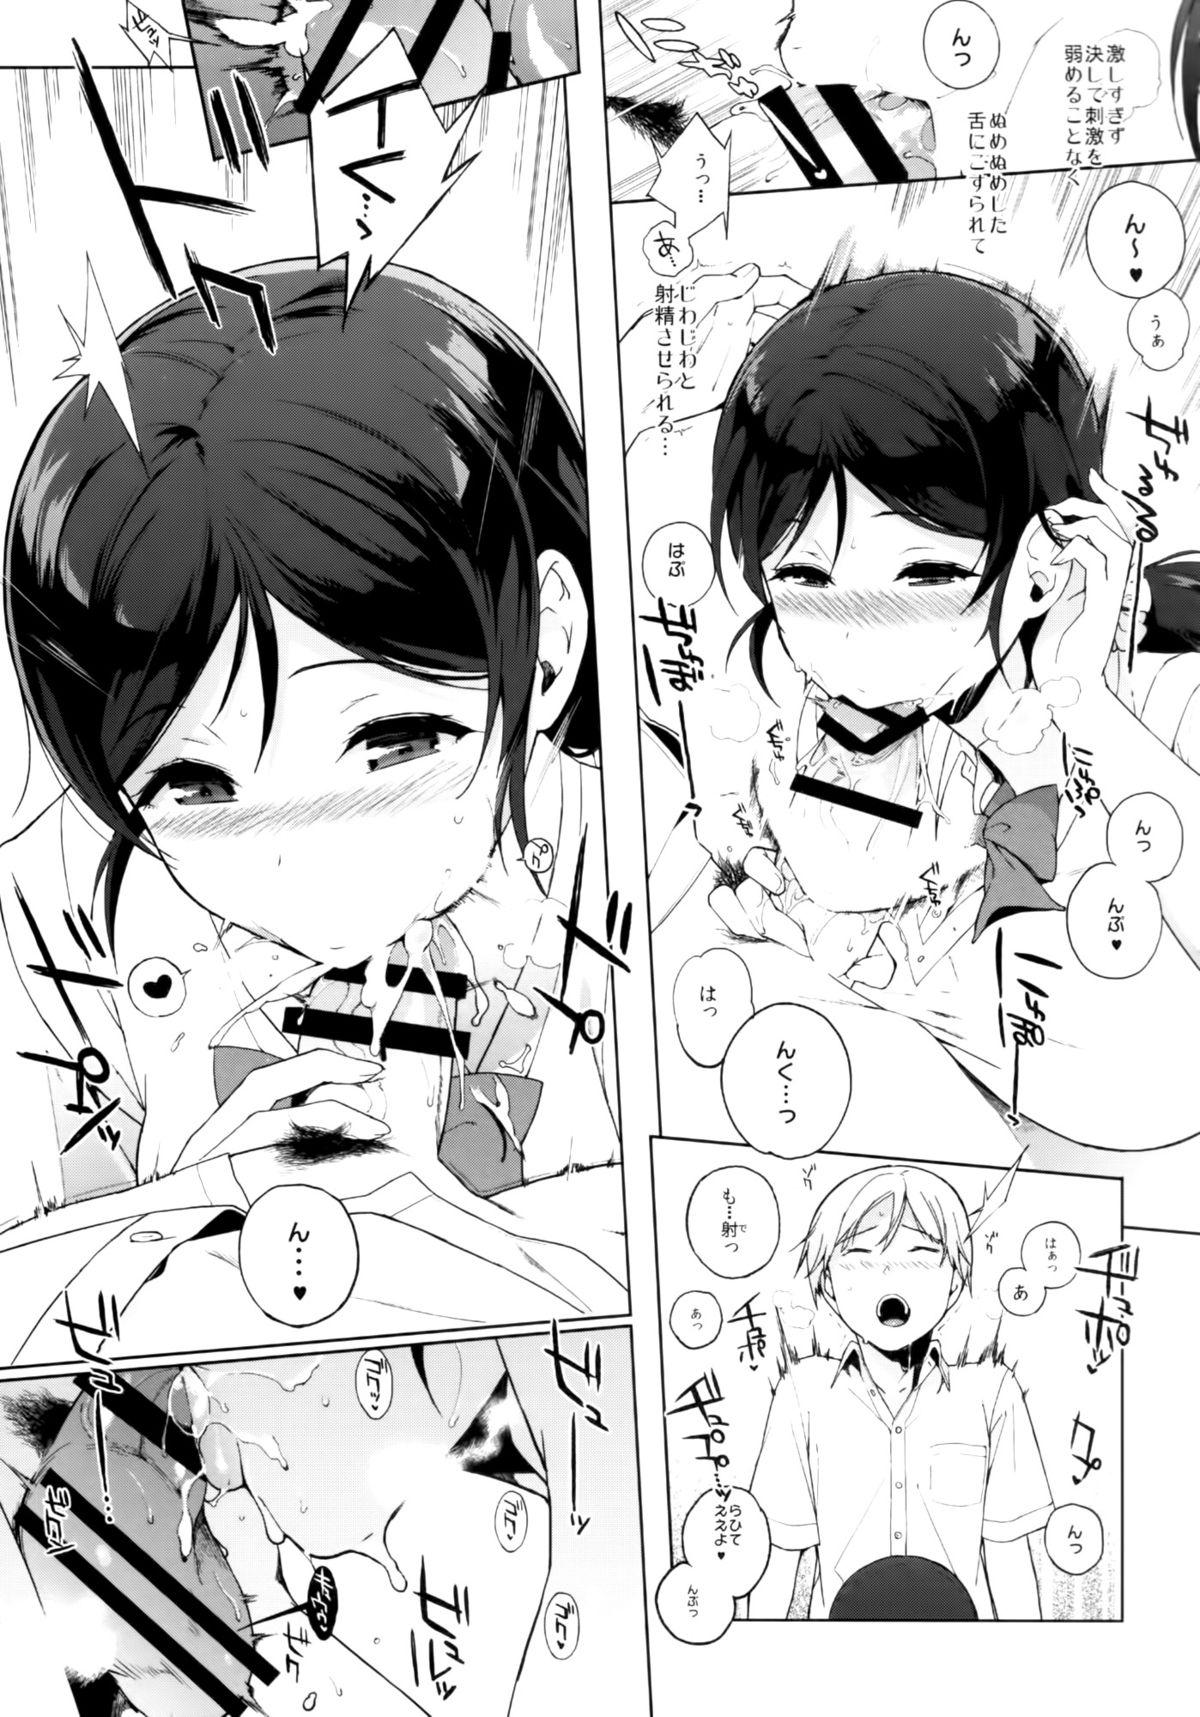 Body NOZOMYSTERY - Love live Amateur - Page 7